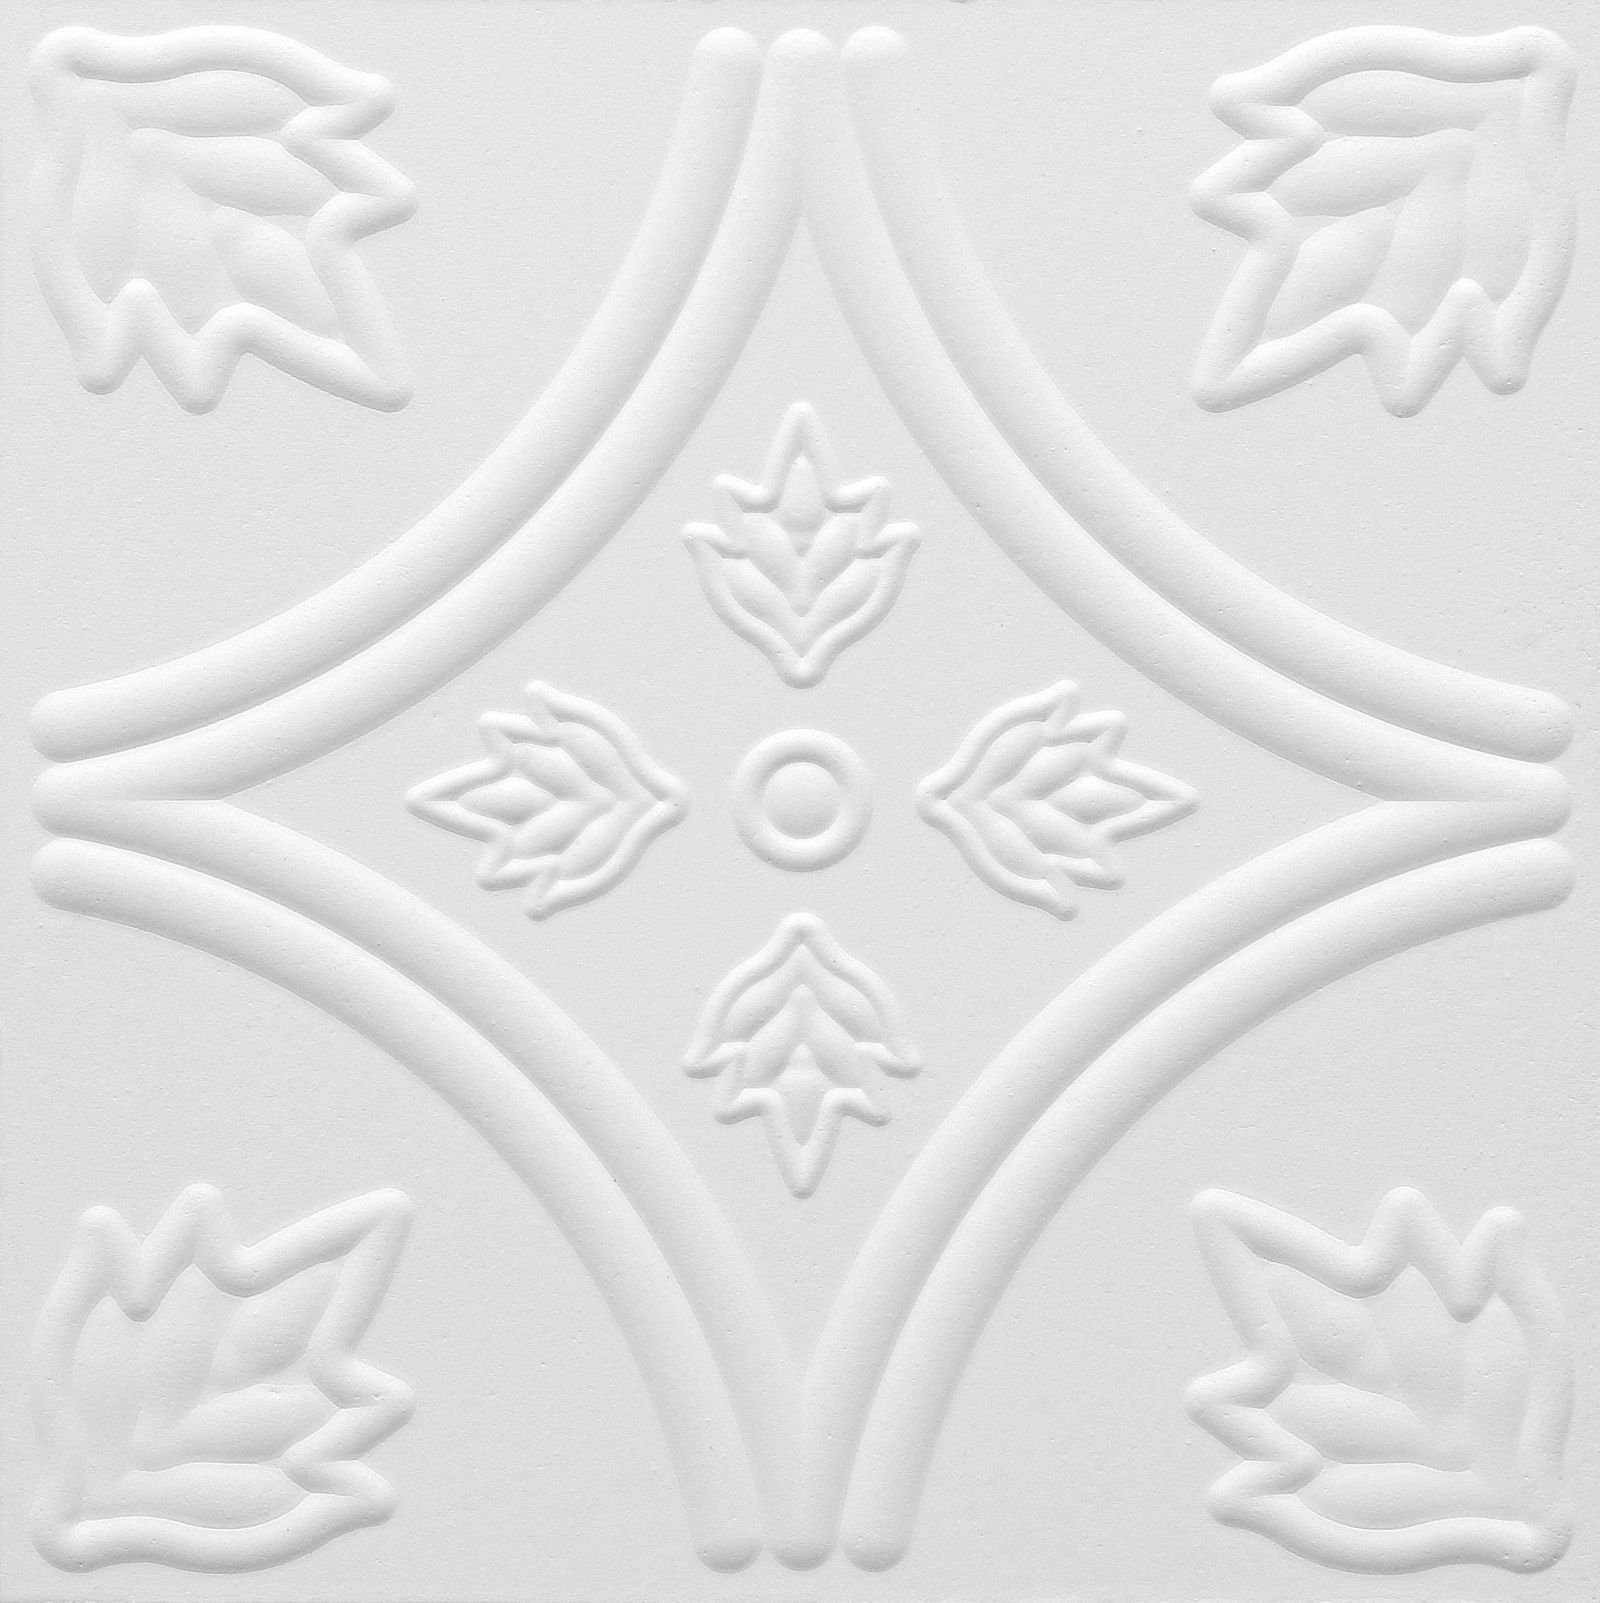 Permalink to Armstrong Ceiling Tile Patterns